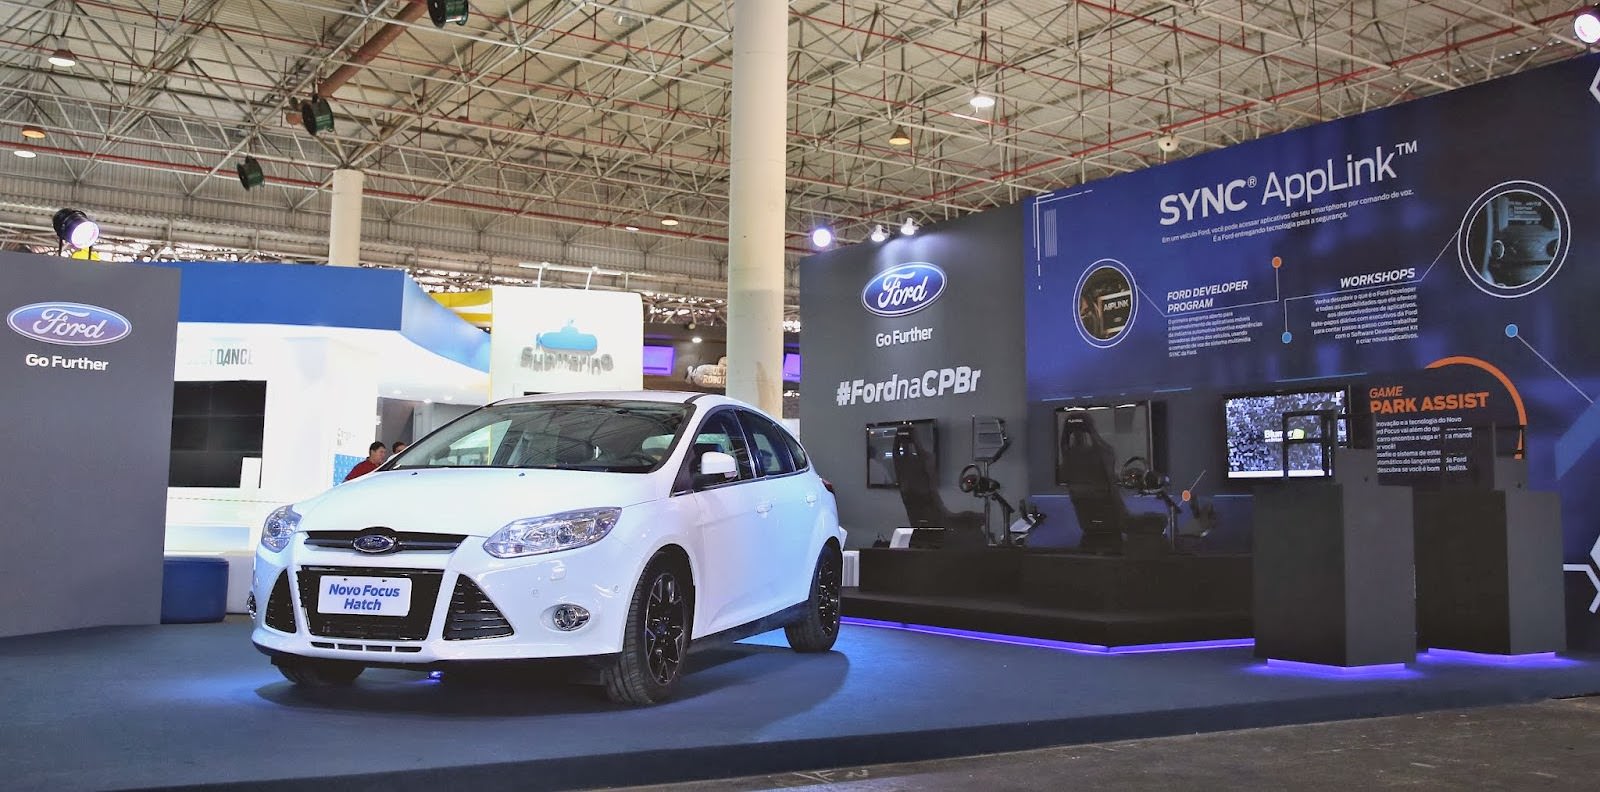 Ford campus party 2014